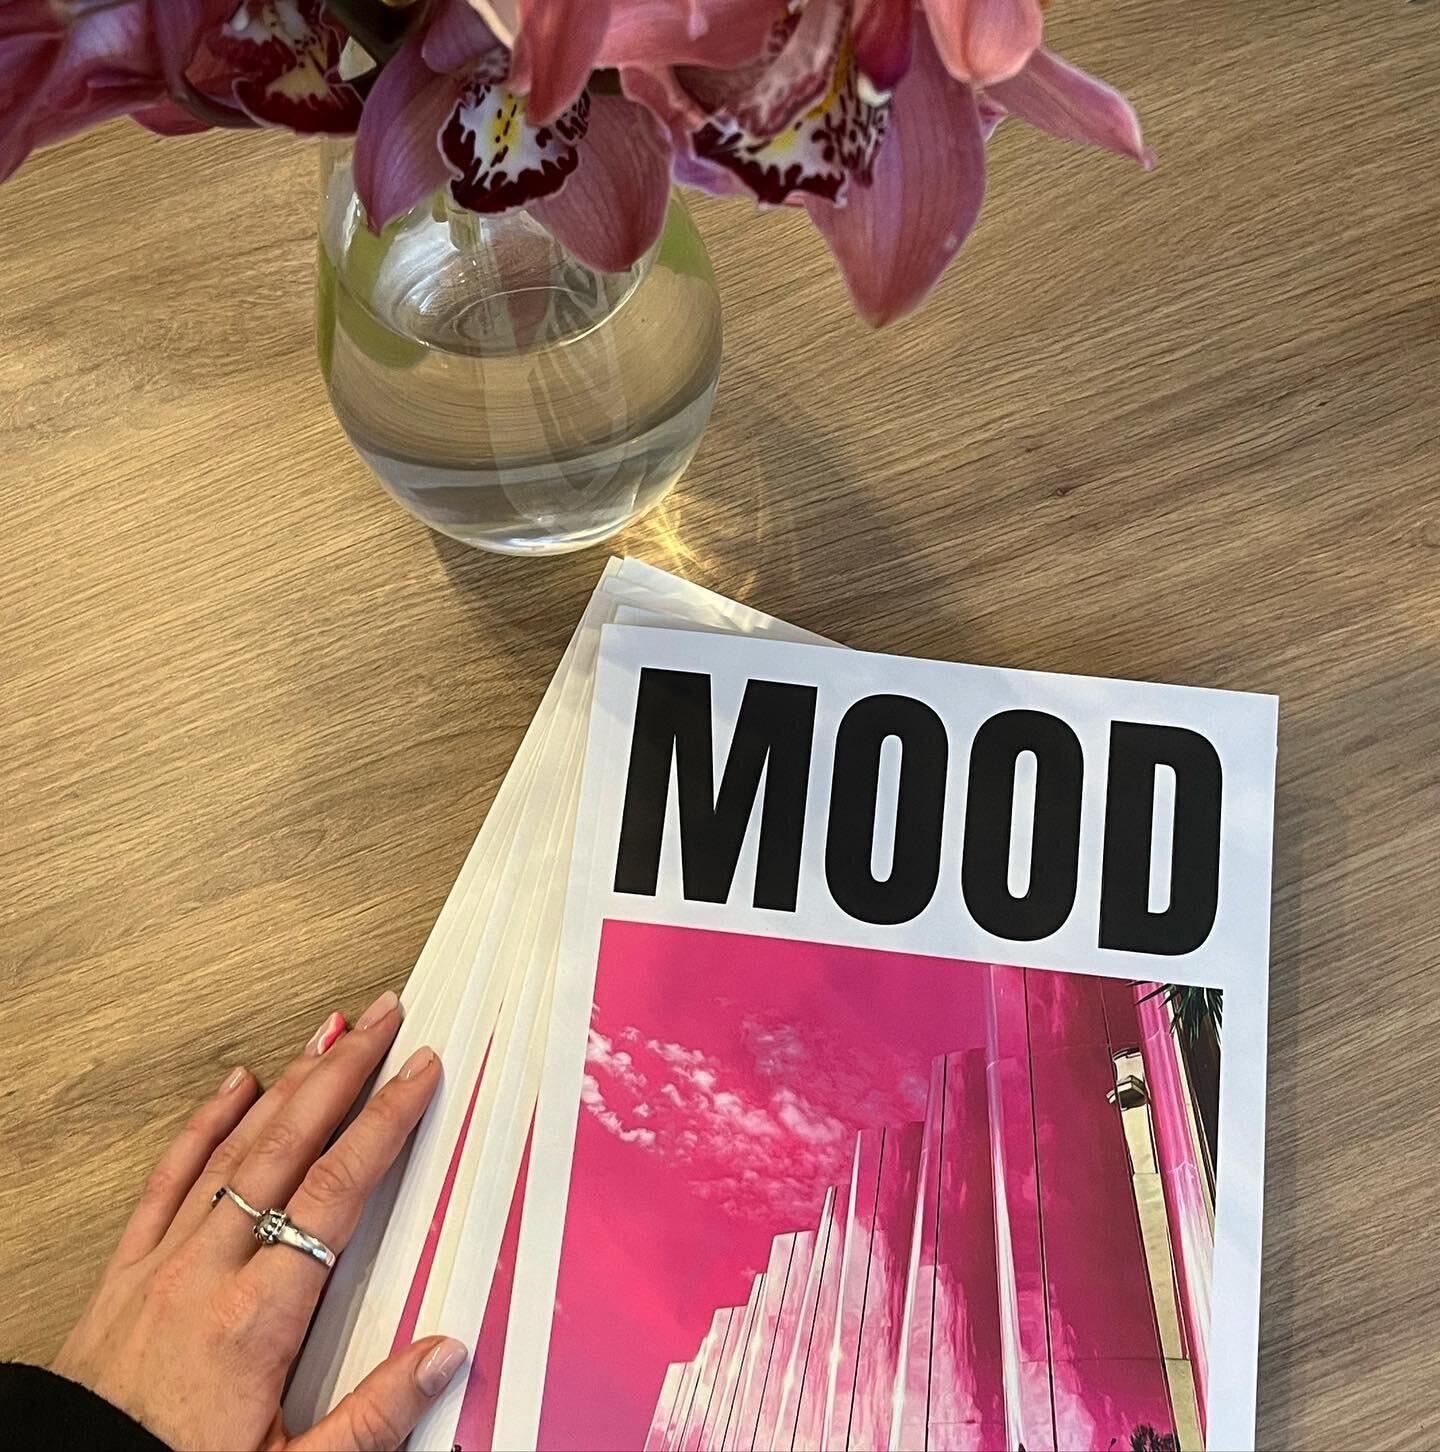 MOOD Mag sitting pretty 💕 We are still obsessed with this cover from our friends @twentysixsouth 🫶🏻

We are quickly coming to the end of our stock for issue 8, and once it&rsquo;s gone, its gone! Make sure you pick up your copy for home or busines